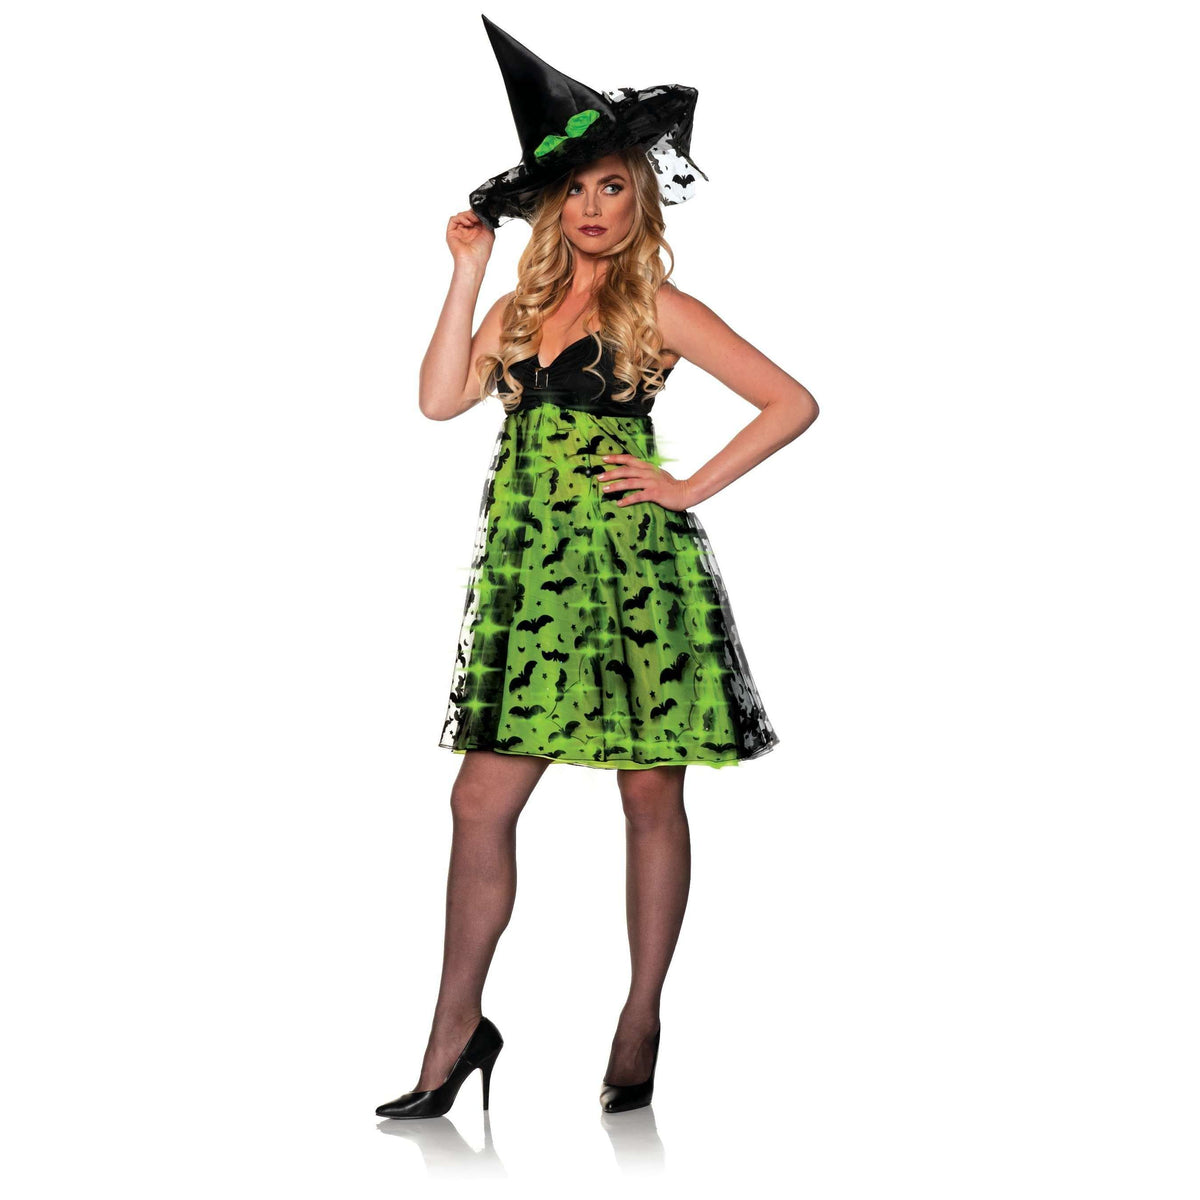 Bibity Green & Black Witch Light Up Skirt w/ Bats and Hat Adult Costume